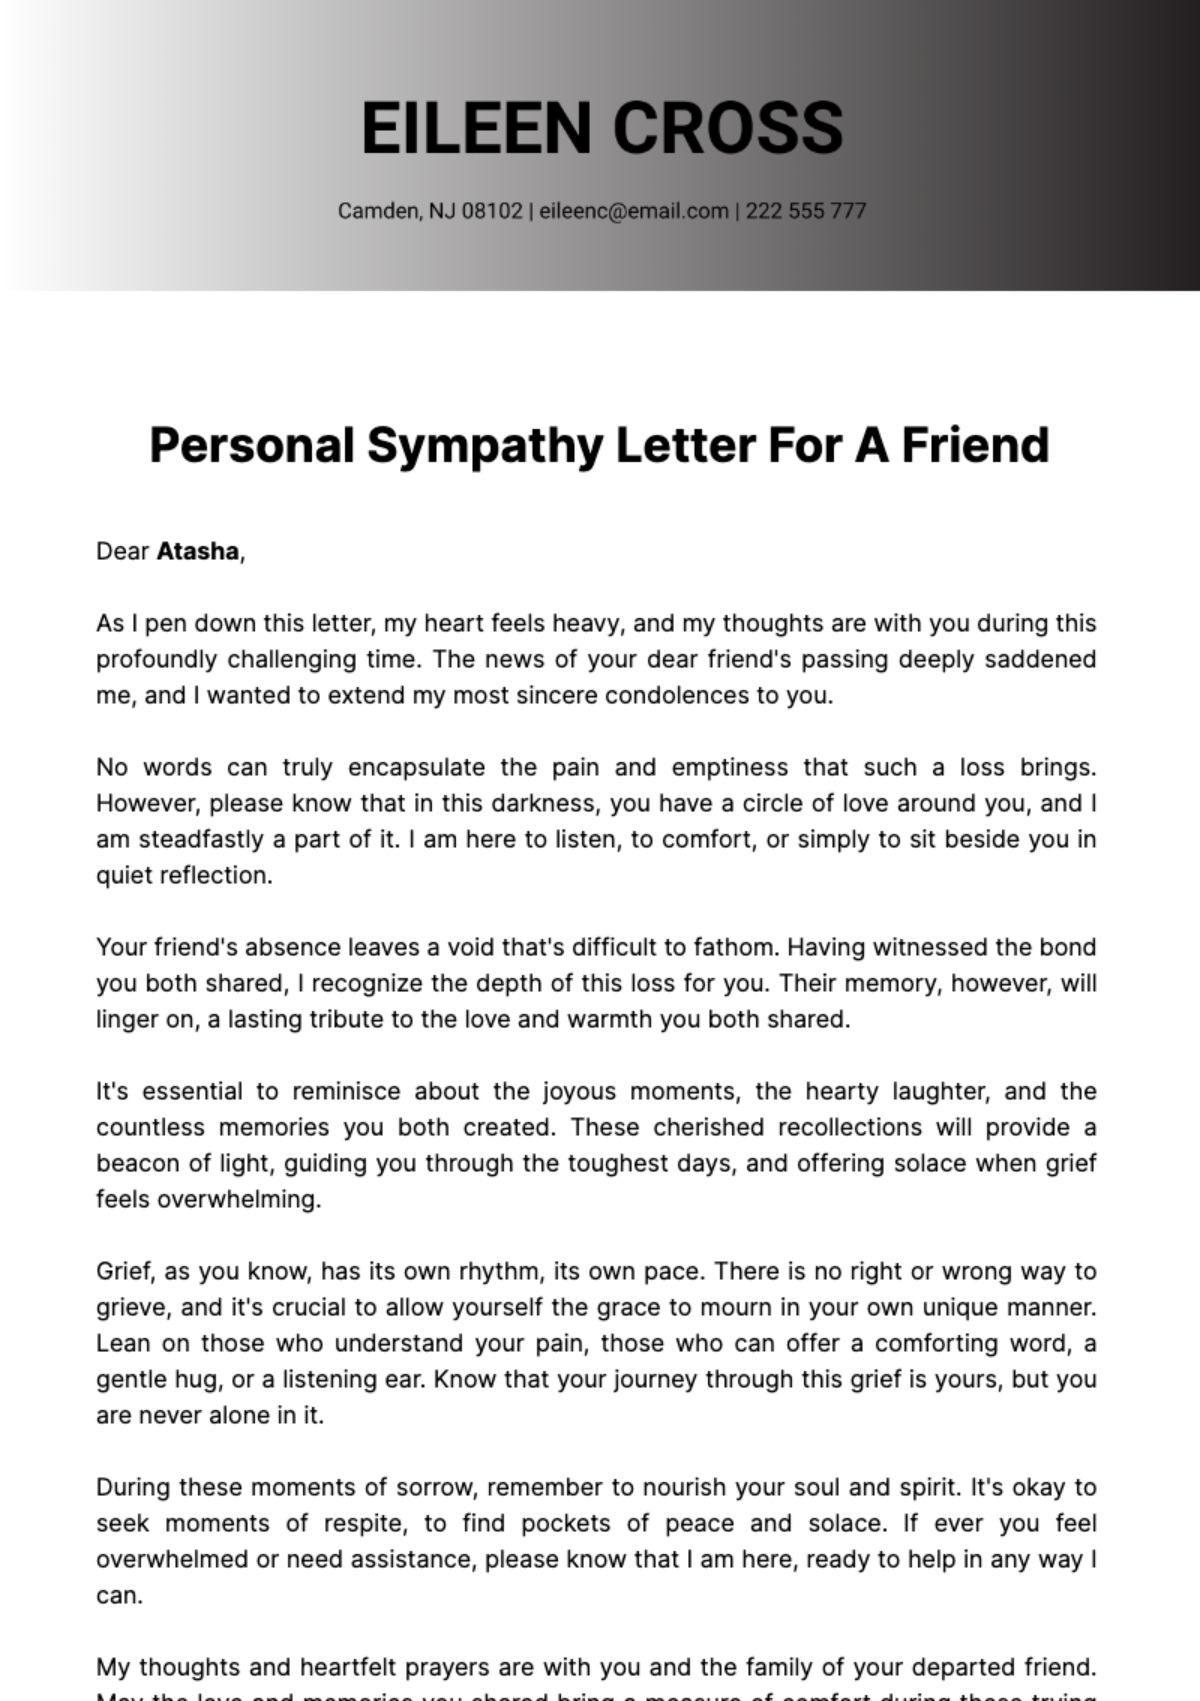 Free Personal Sympathy Letter For A Friend  Template